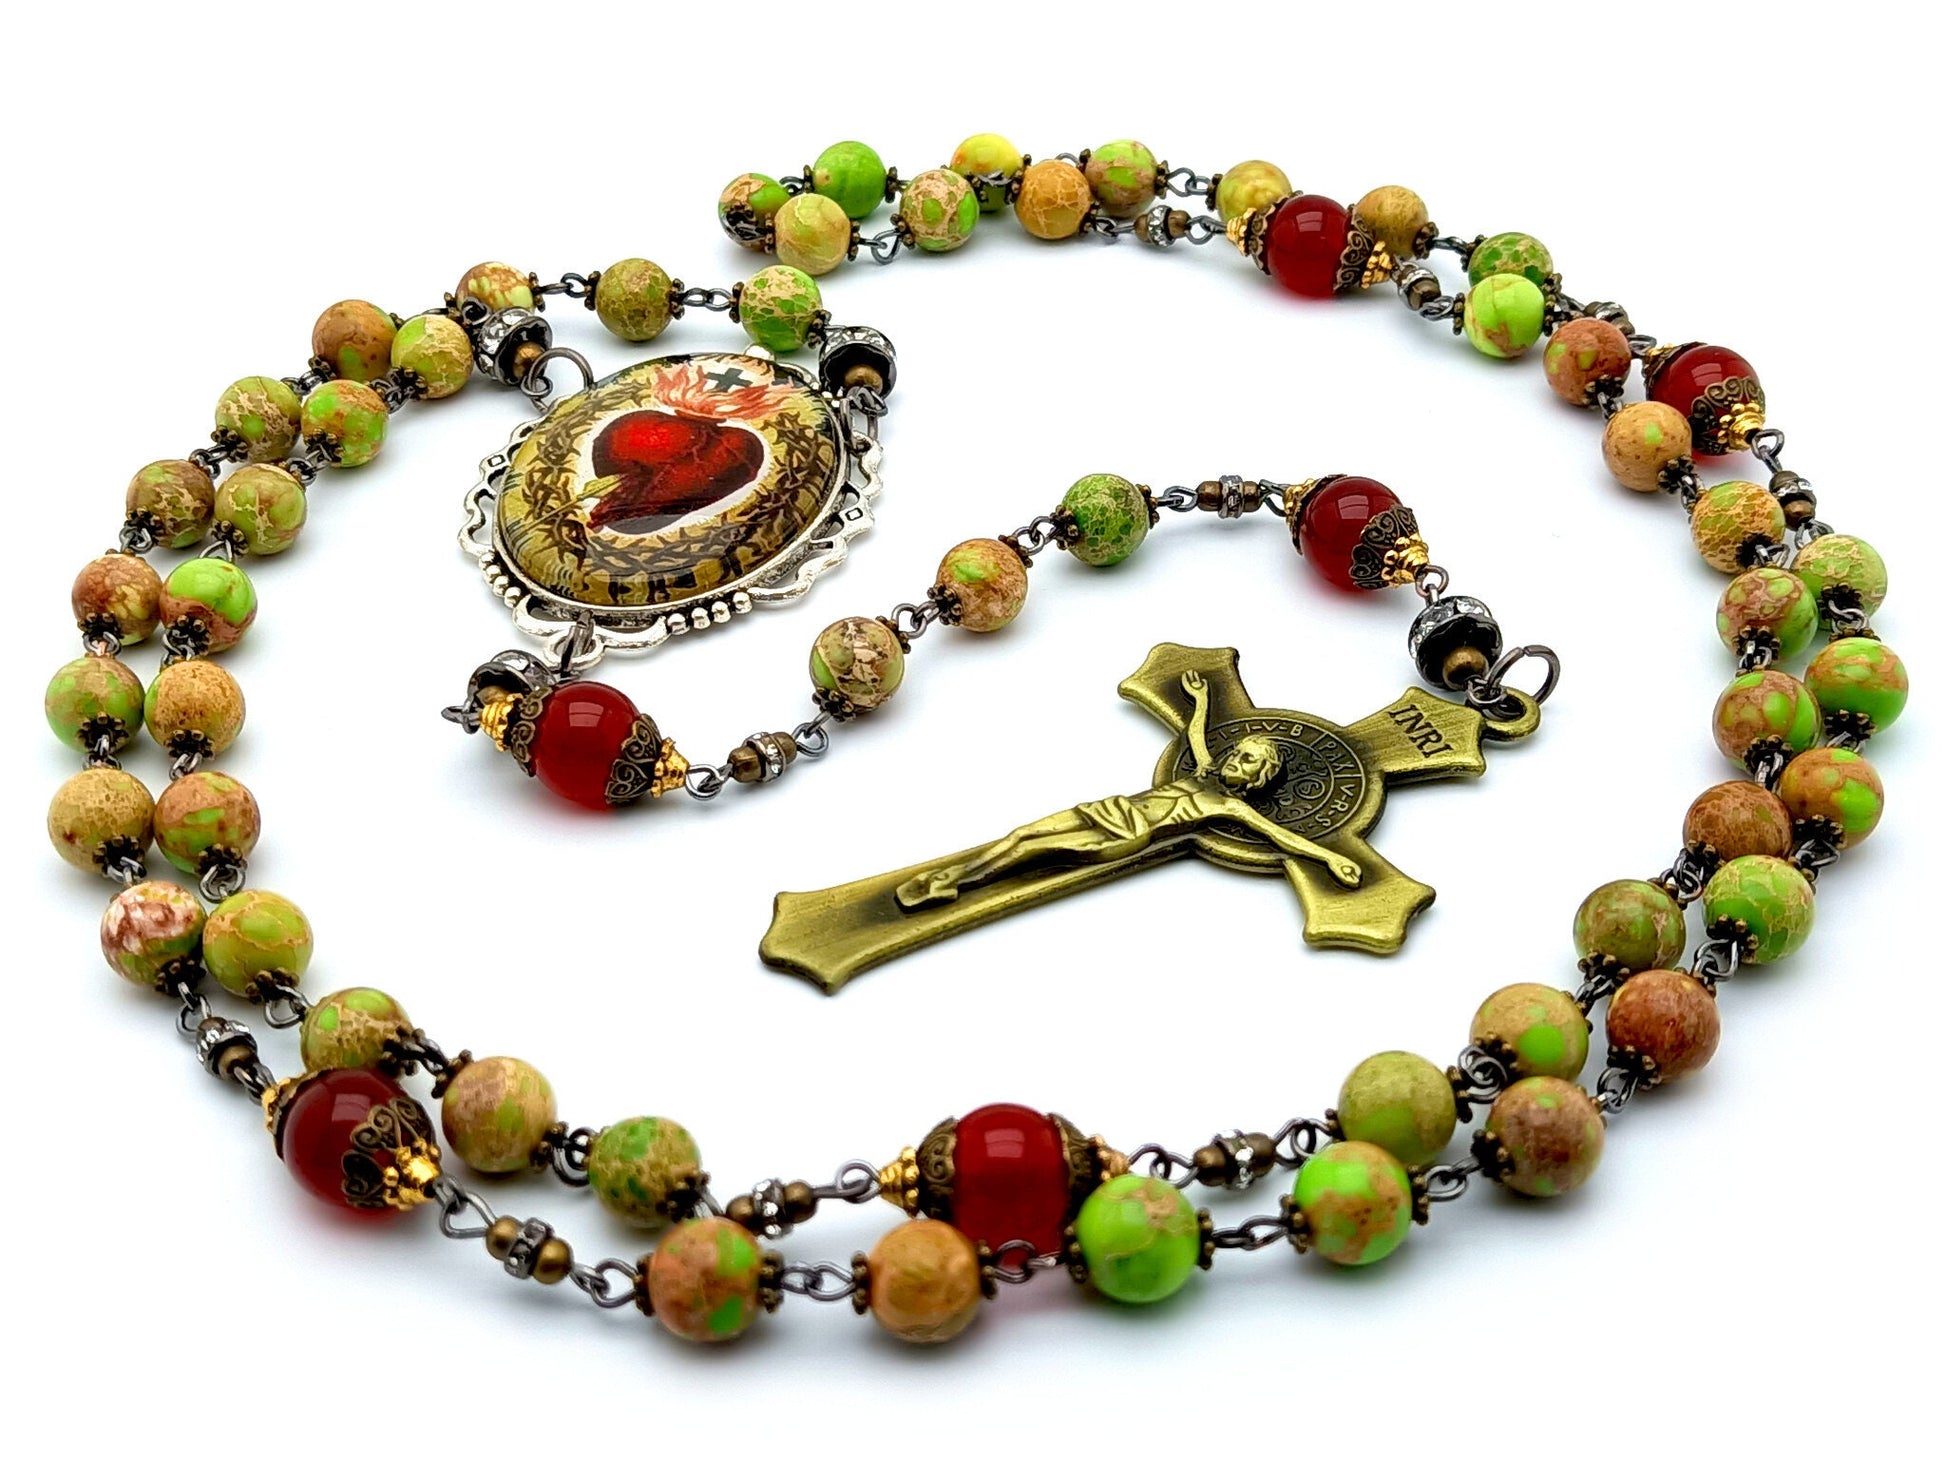 Sacred Heart of Jesus unique rosary beads with green jasper gemstone and ruby precious stone beads, brass Saint Benedict crucifix and large picture centre medal.